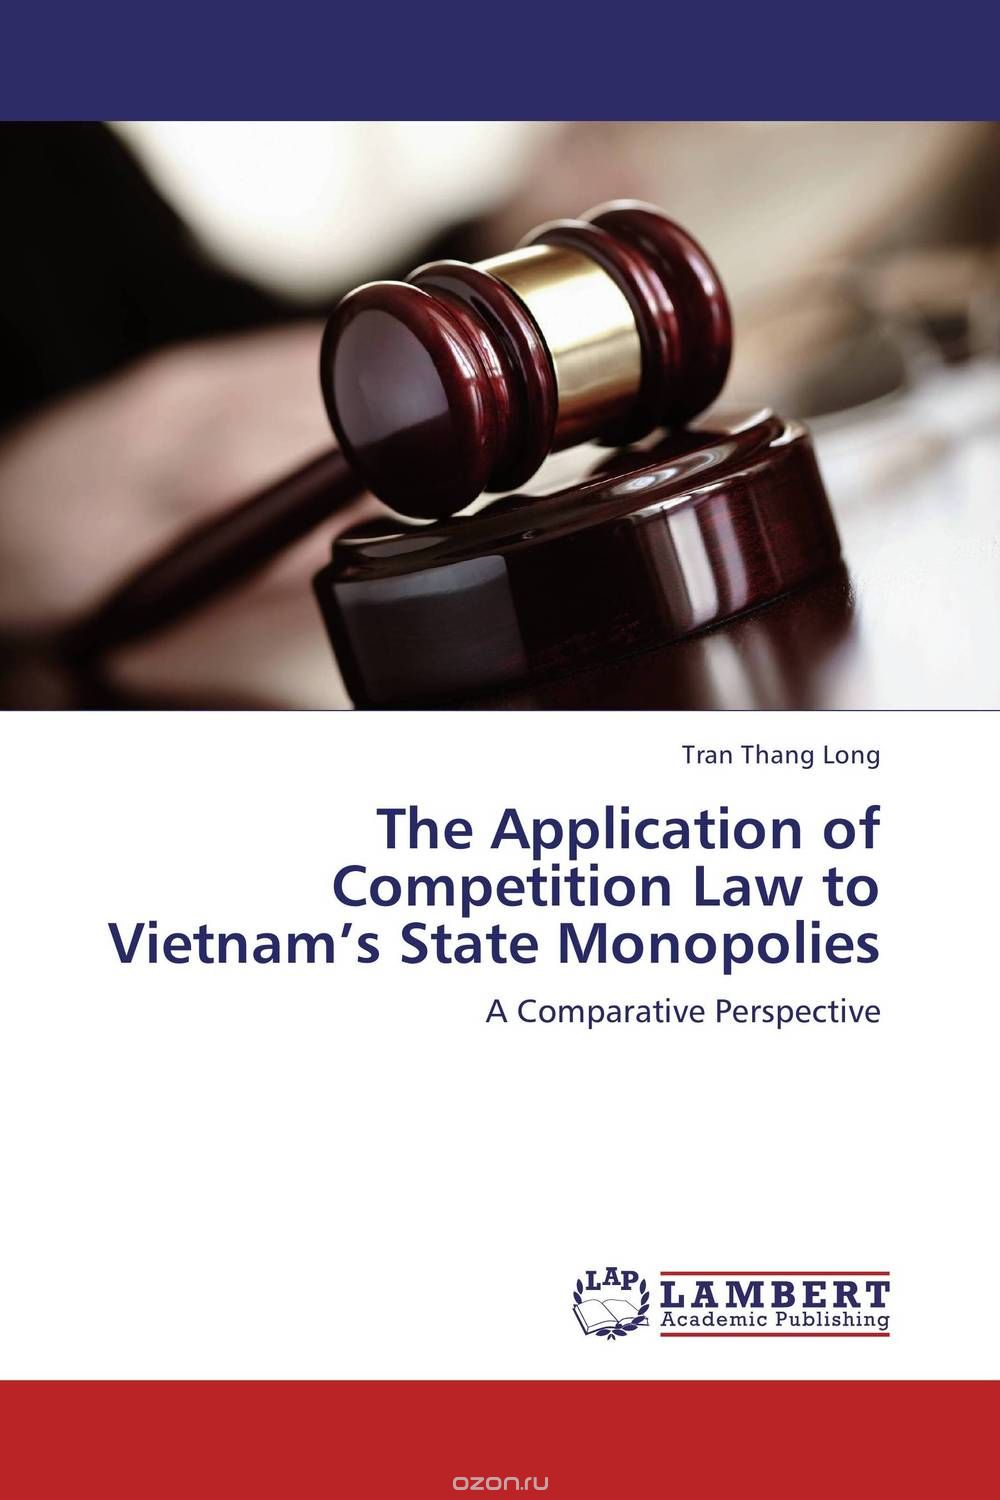 The Application of Competition Law to Vietnam’s State Monopolies